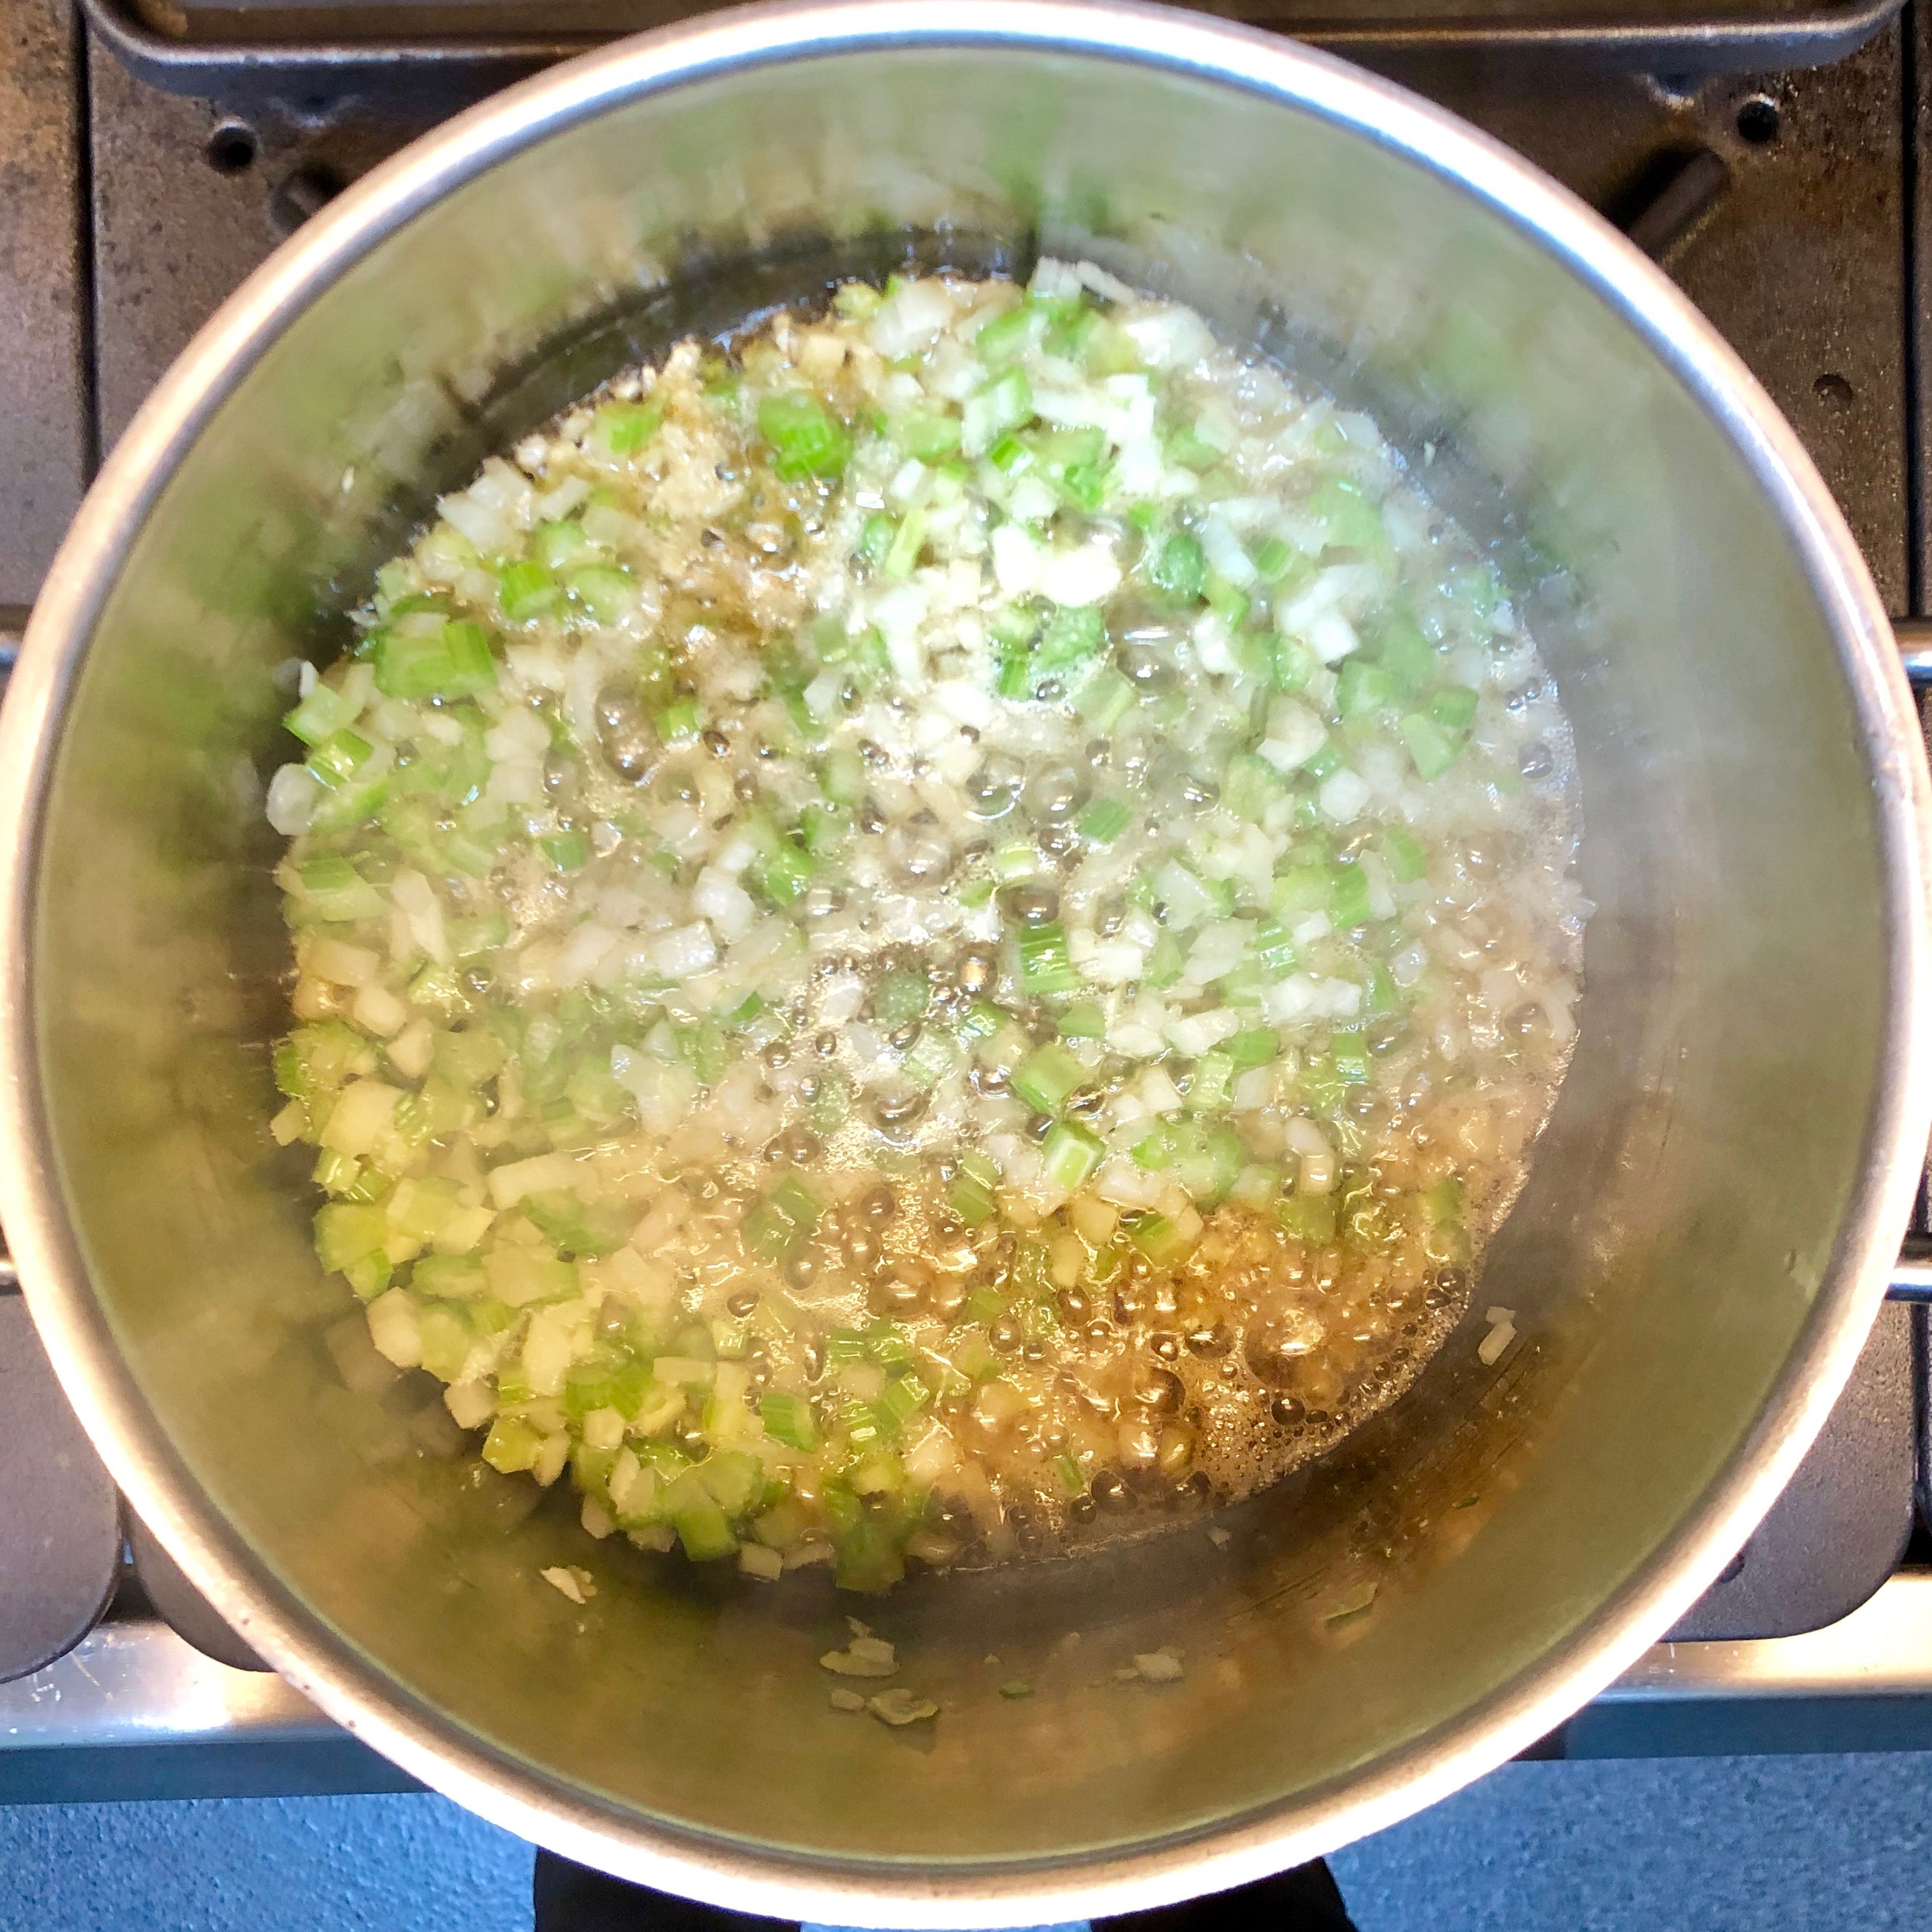 Heat sesame oil in a stockpot. Add already cut onion, garlic, celery and ginger. Cook until soft but not brown. About 3 minutes.